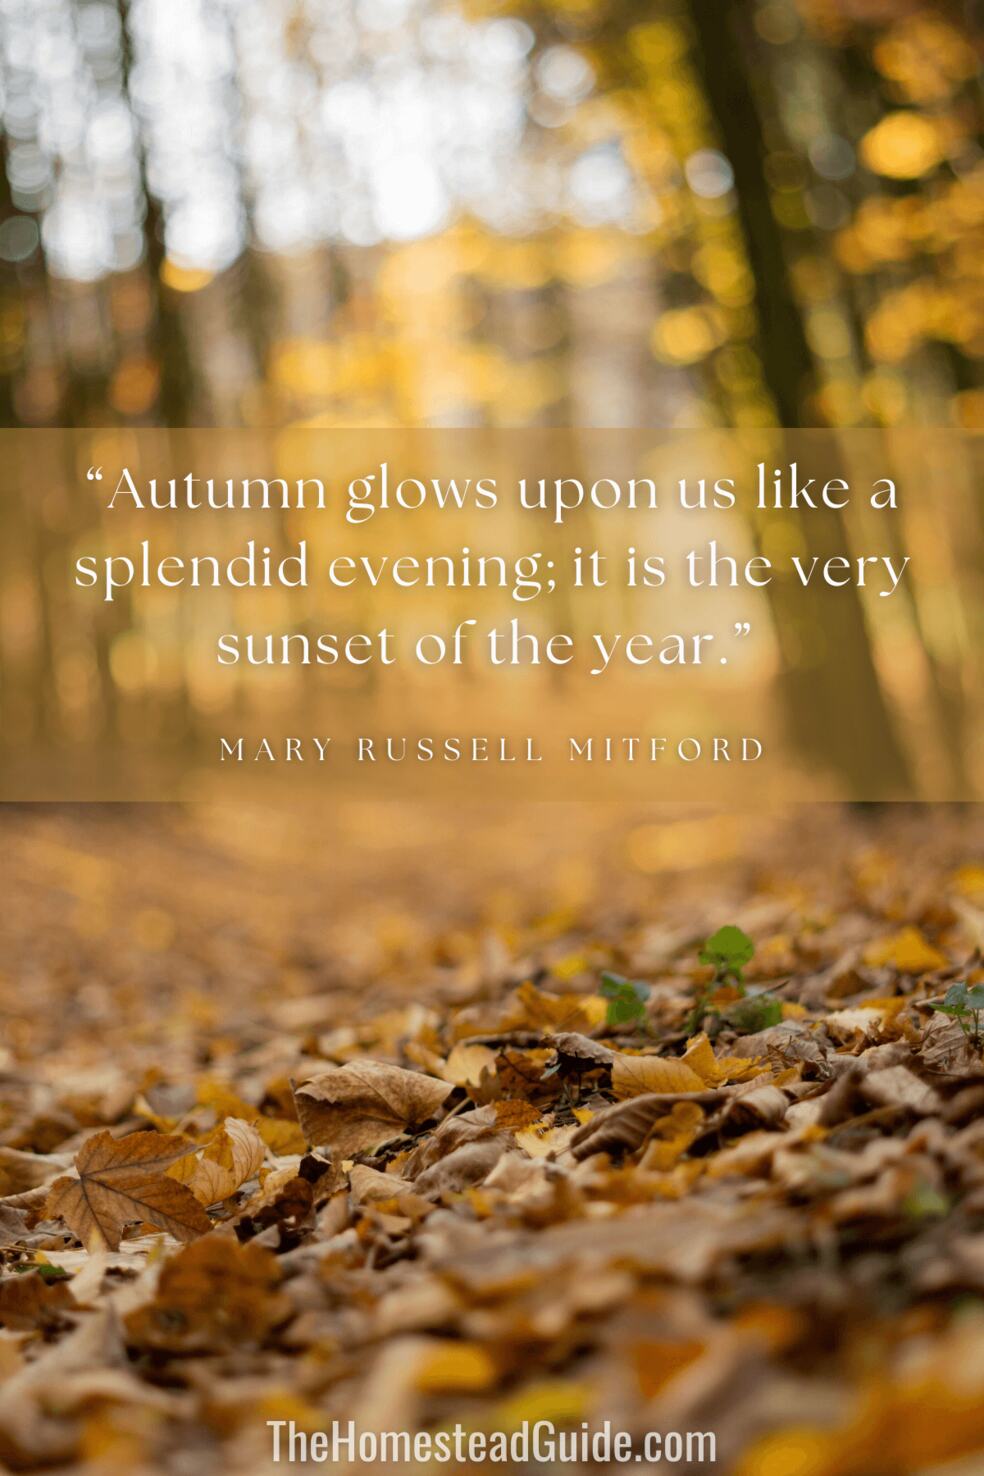 Autumn glows upon us like a splendid evening. It is the very sunset of the year.